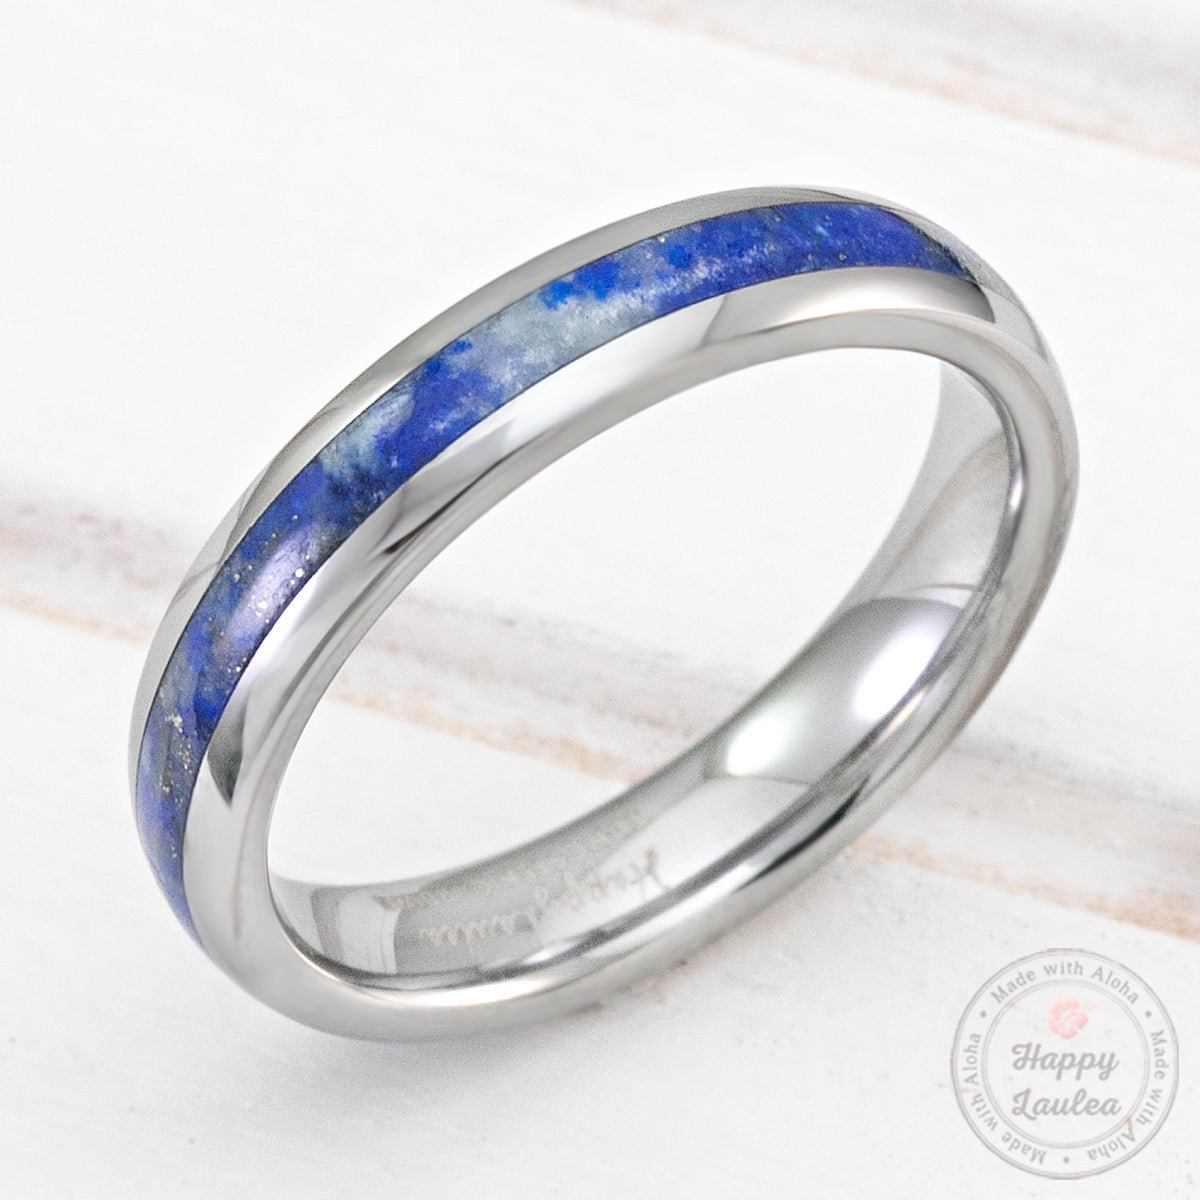 Tungsten Carbide 4mm Ring with Lapis Lazuli Inlay - Dome Shape, Comfort Fitment